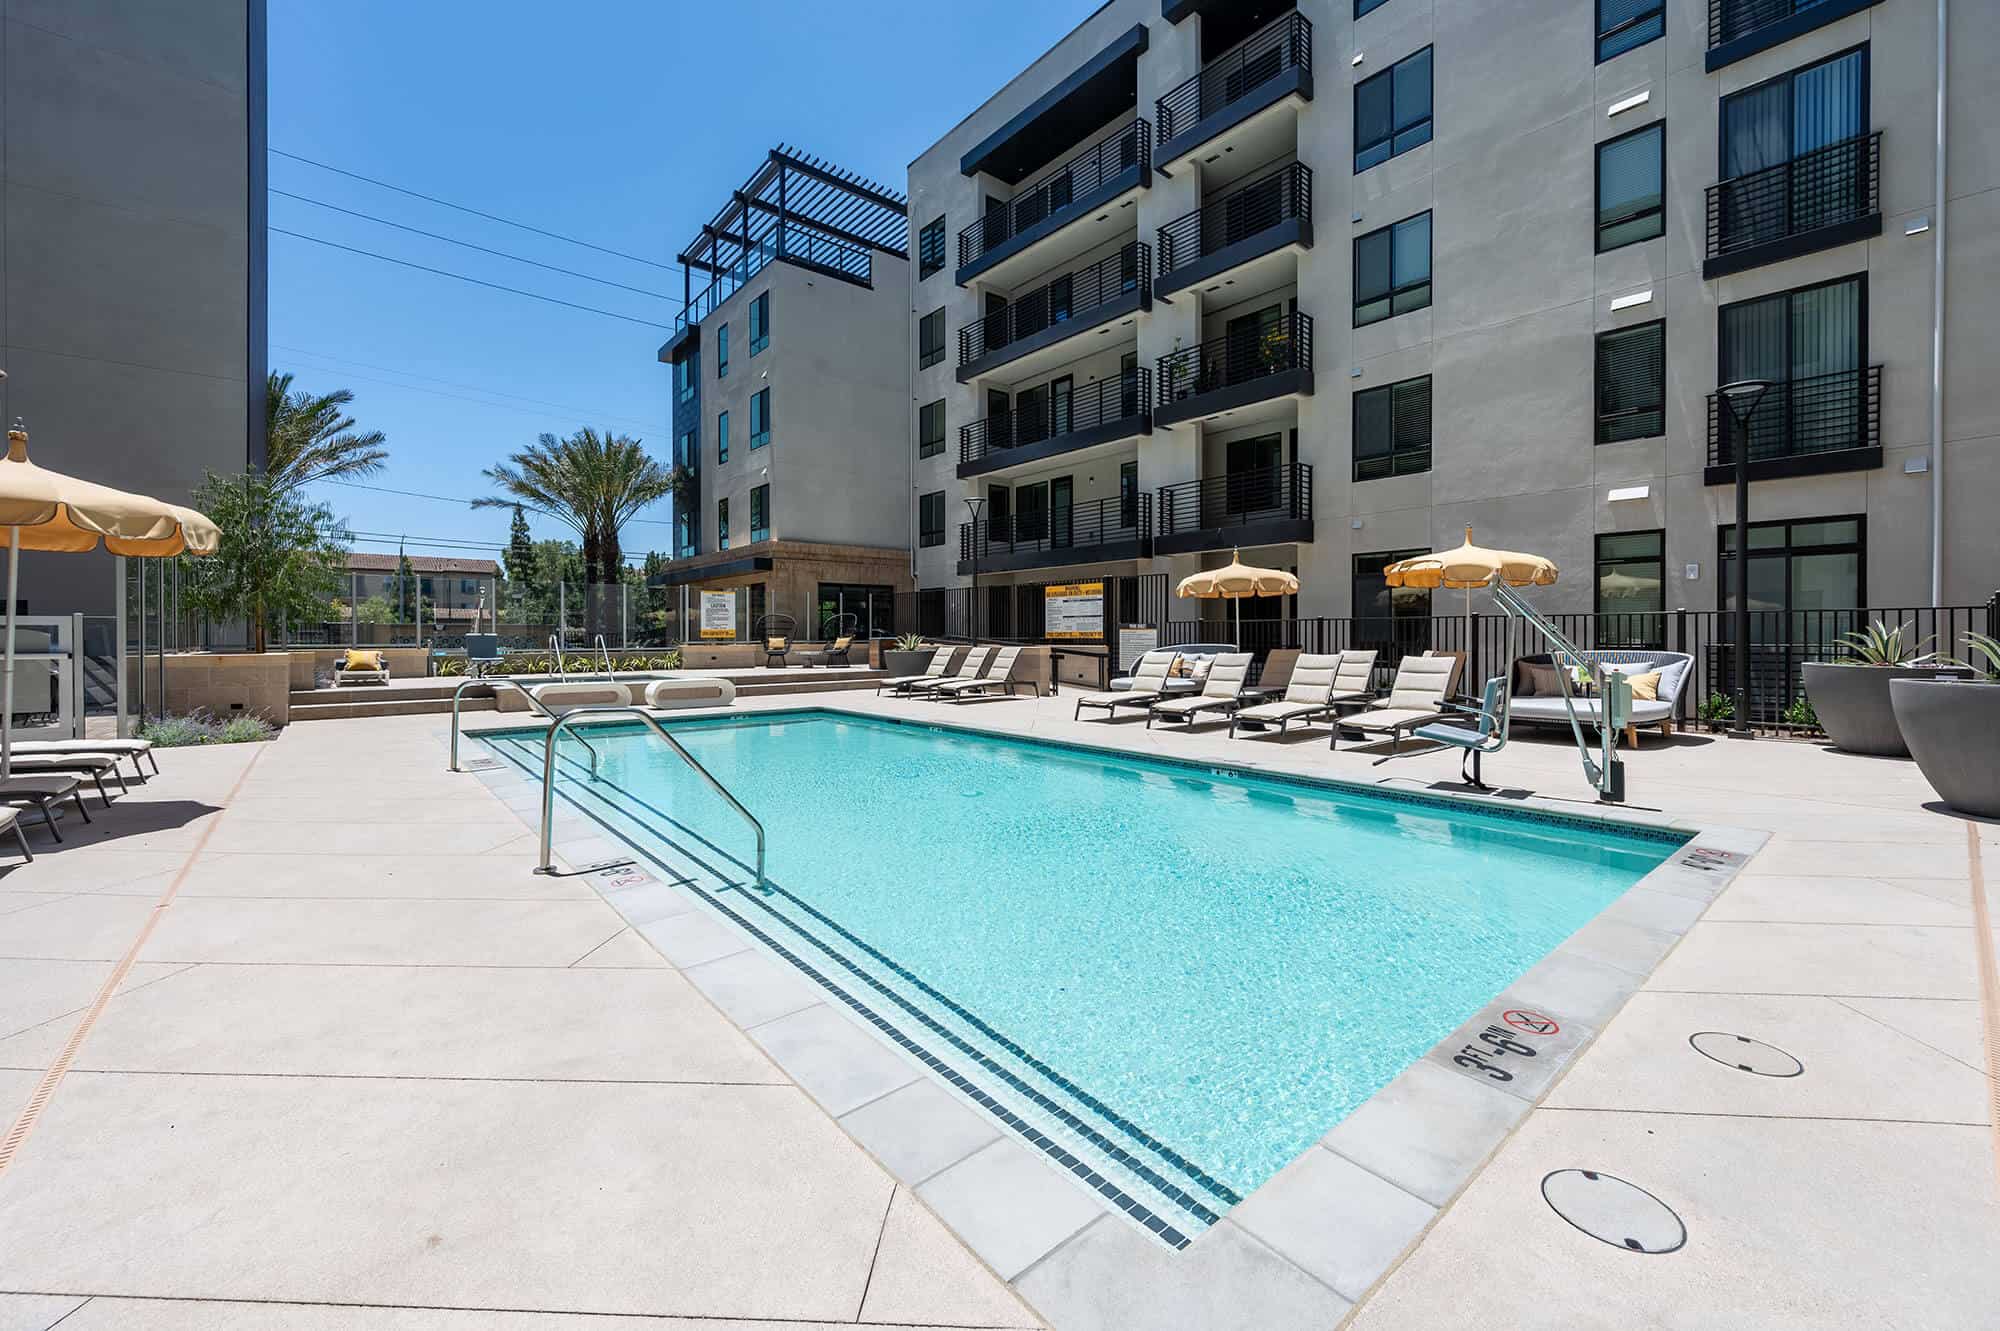 A view of the outdoor swimming pool area with lounge chairs, outdoor seating, and umbrellas for shade, with Bloom Apartments serving as the backdrop